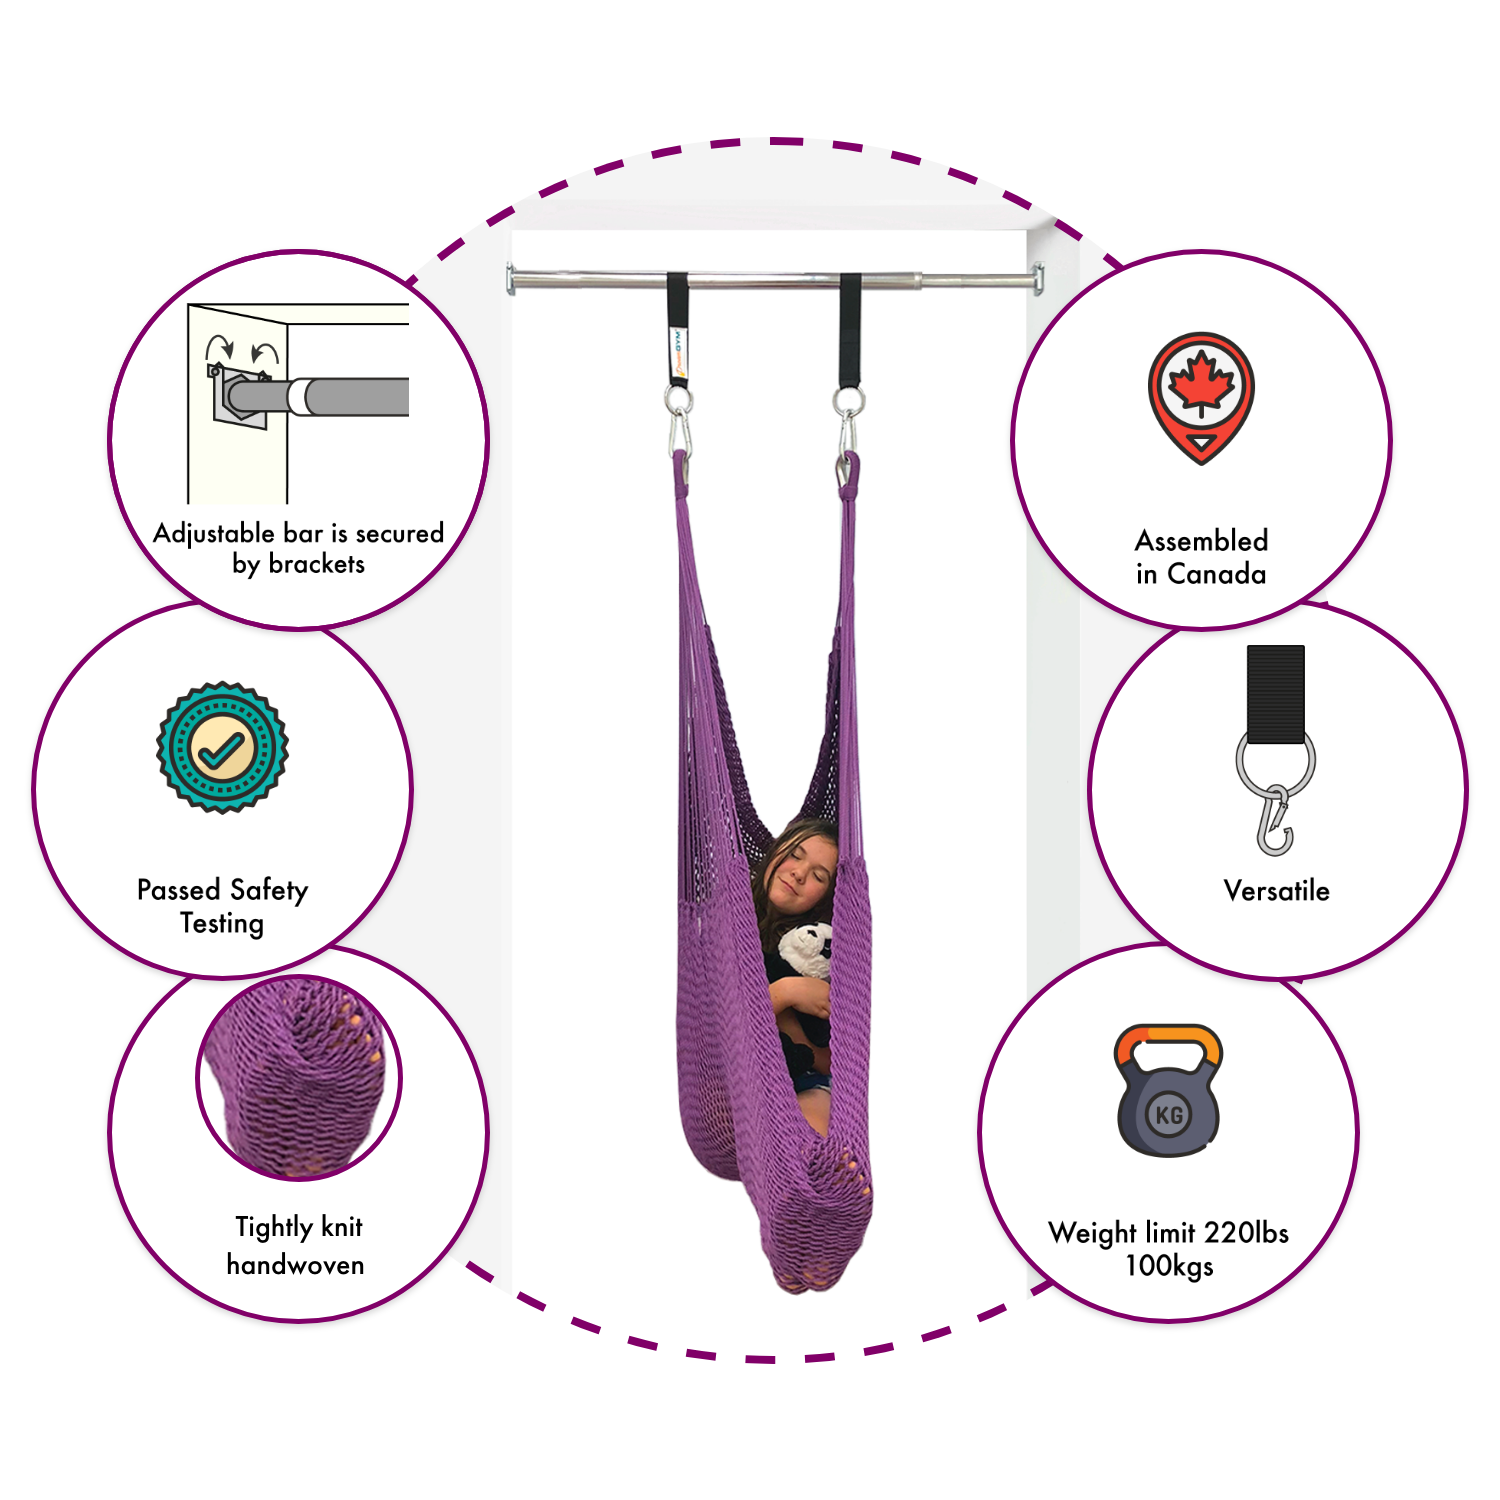 Infographic about features and benefits of a doorway swing. Adjustable bar is secured by brackets. Passed safety testing. Tightly knit handwoven material. Assembled in Canada. Versatile. Weight limit 220lbs - 100kg